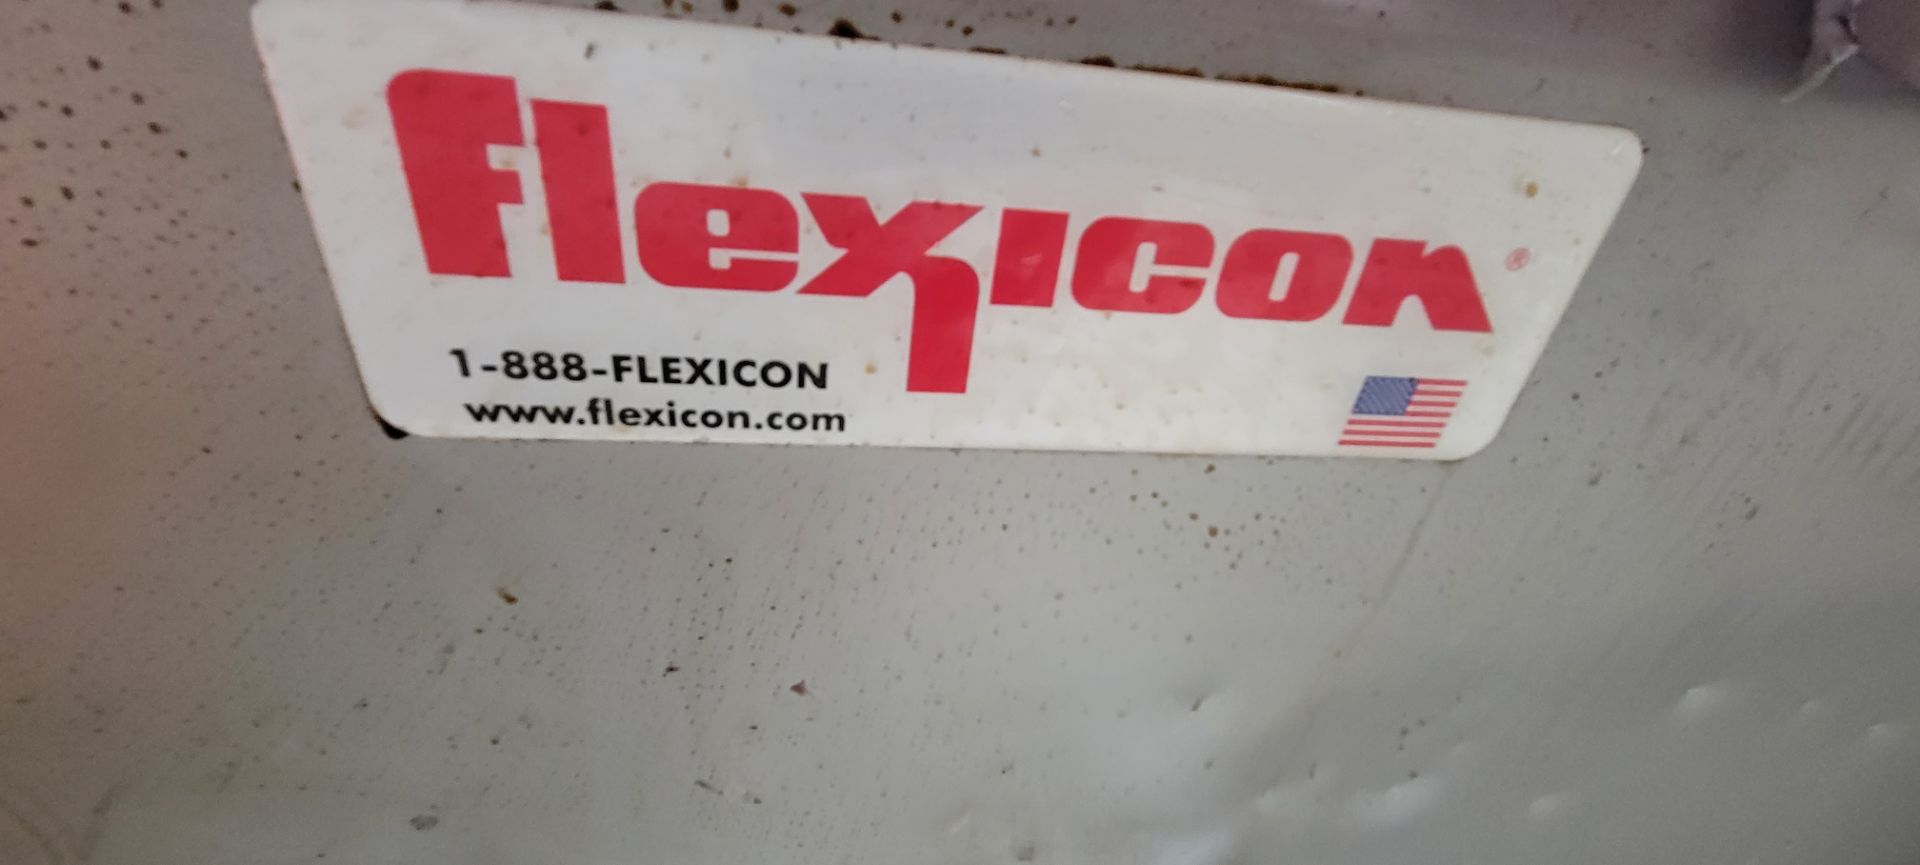 Flexicon Material Loading Station - Image 5 of 6